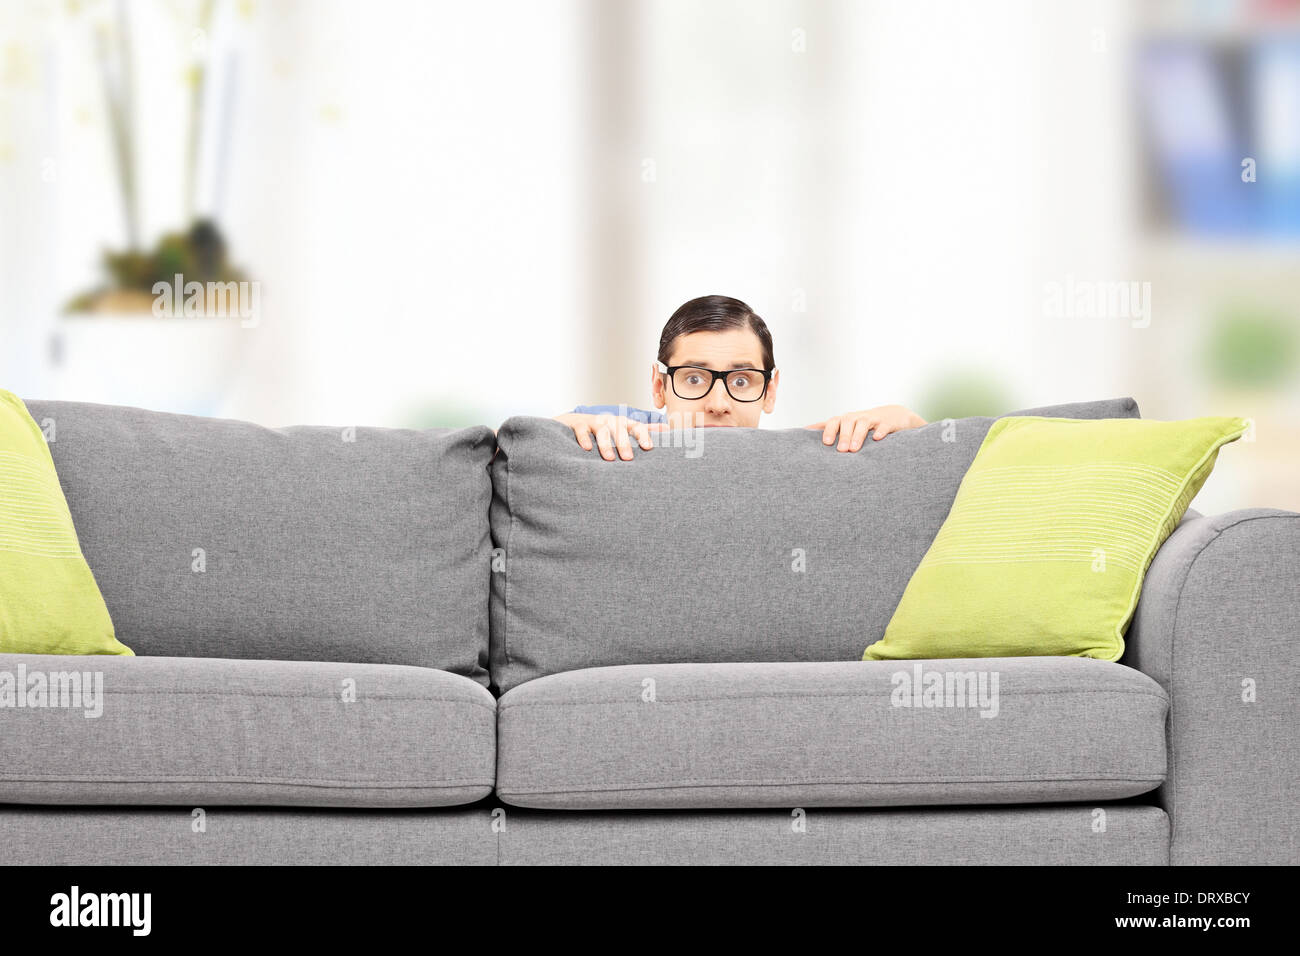 Frightened man hiding behind a sofa at home Stock Photo